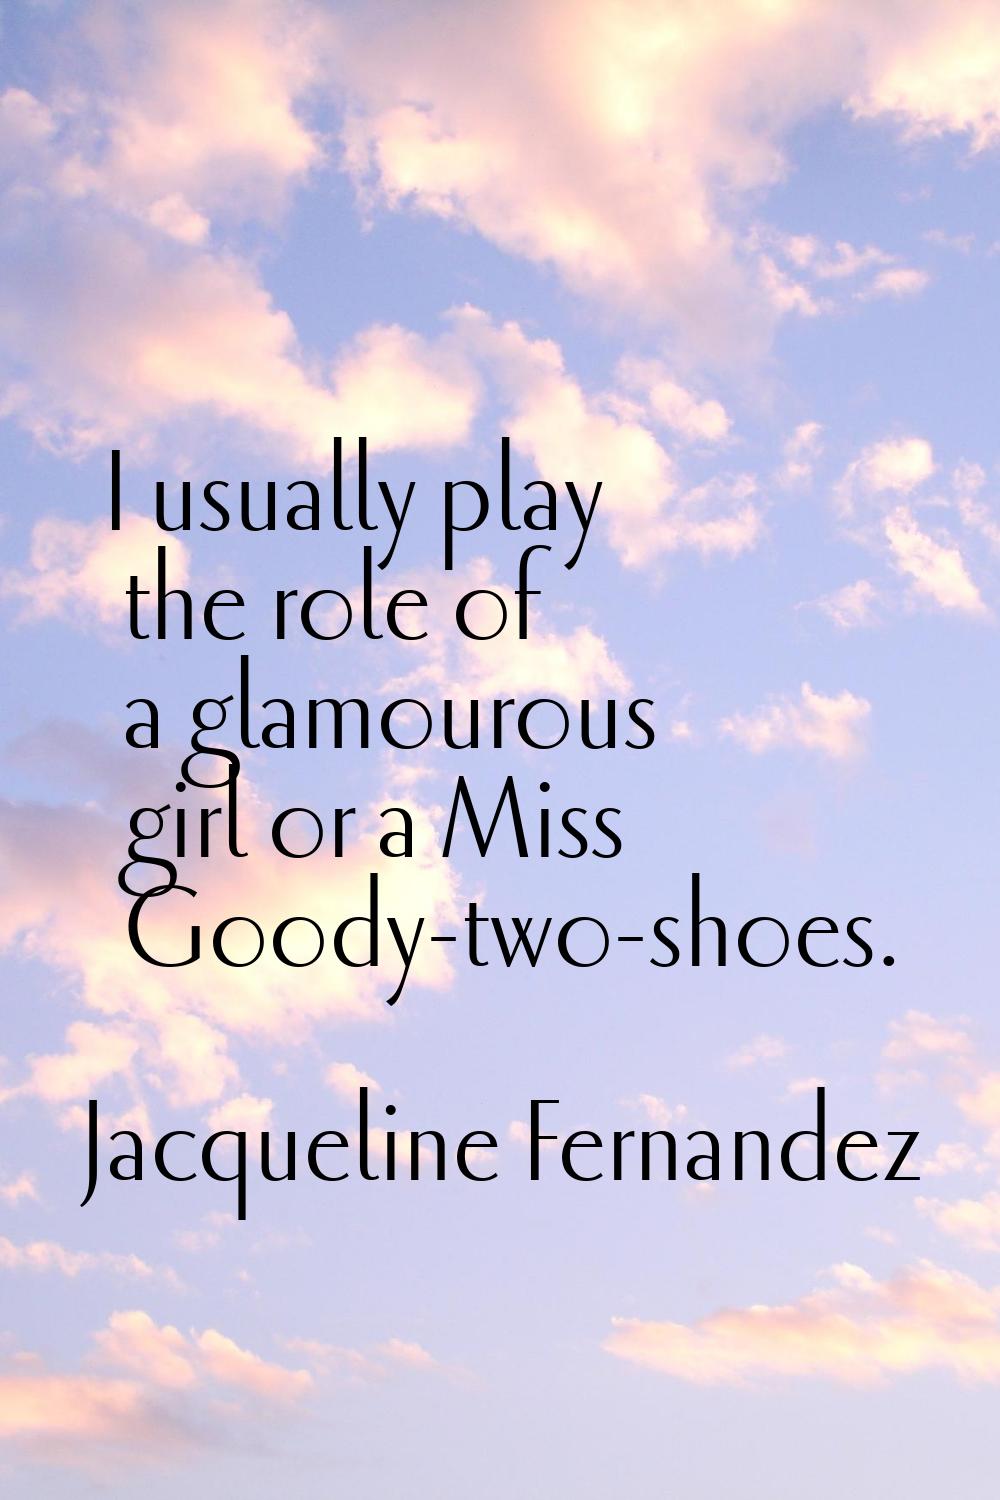 I usually play the role of a glamourous girl or a Miss Goody-two-shoes.